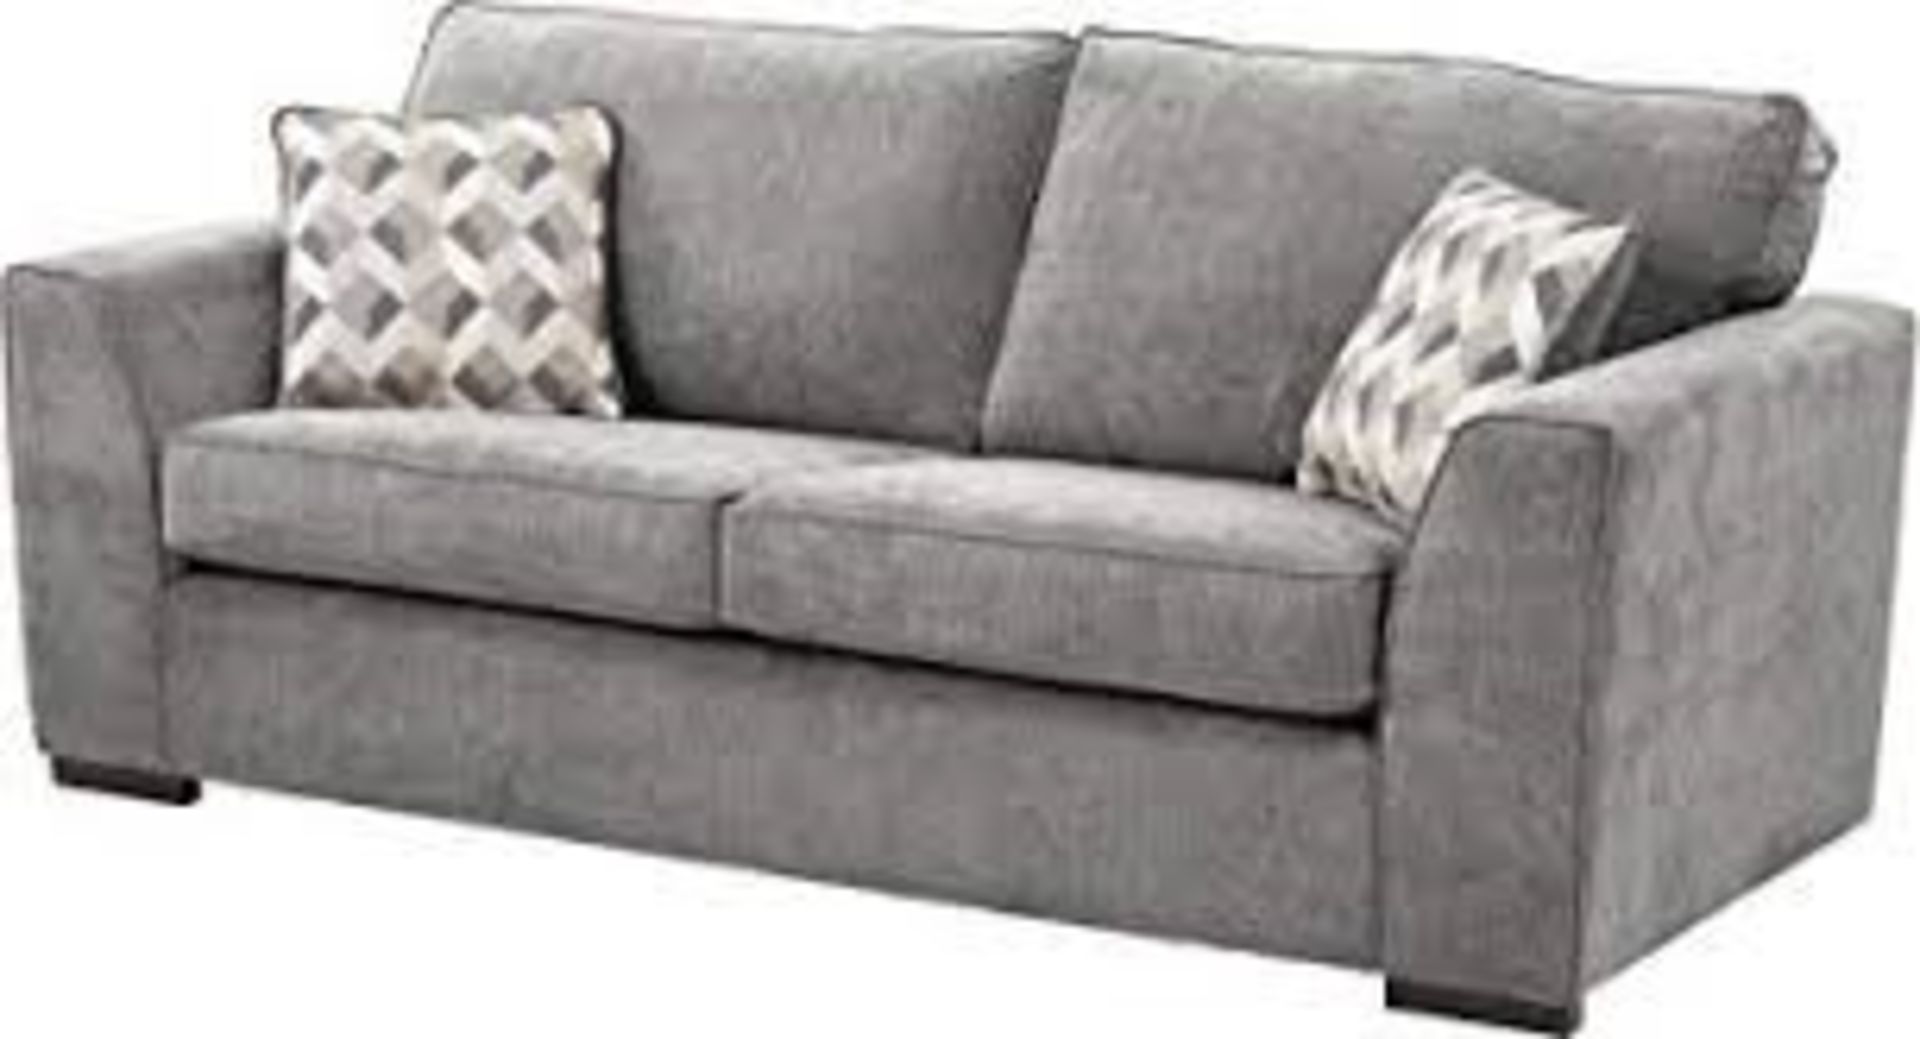 1 / BRAND NEW BOSTON 3 SEATER SOFA IN DARK GREY (VIEWING HIGHLY RECOMMENDED)